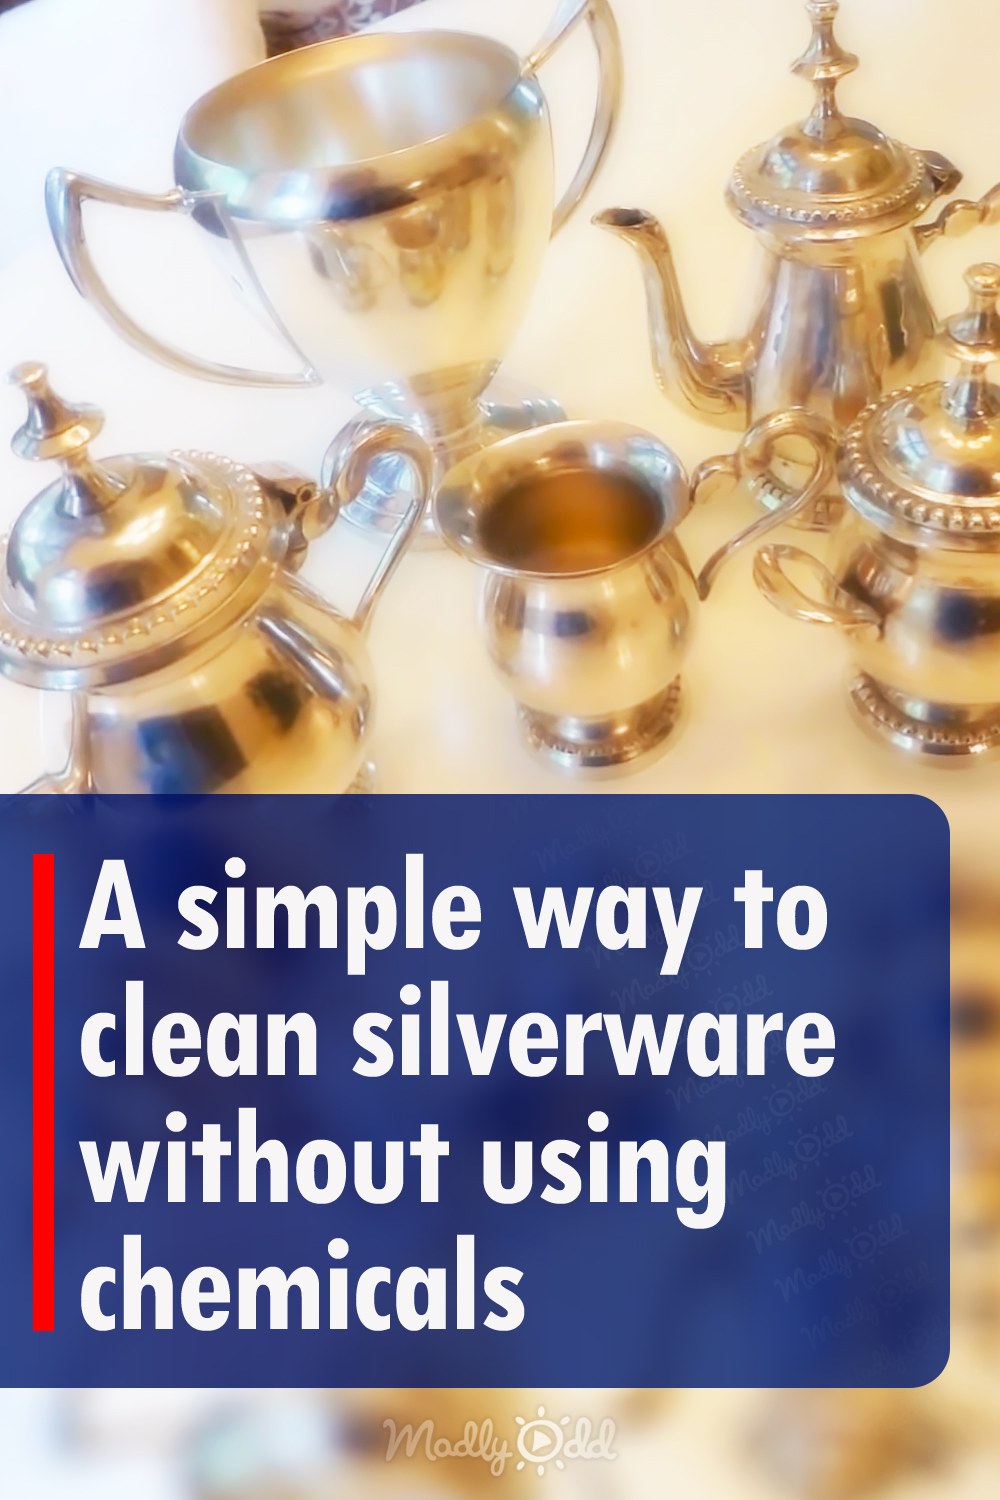 A simple way to clean silverware without using chemicals